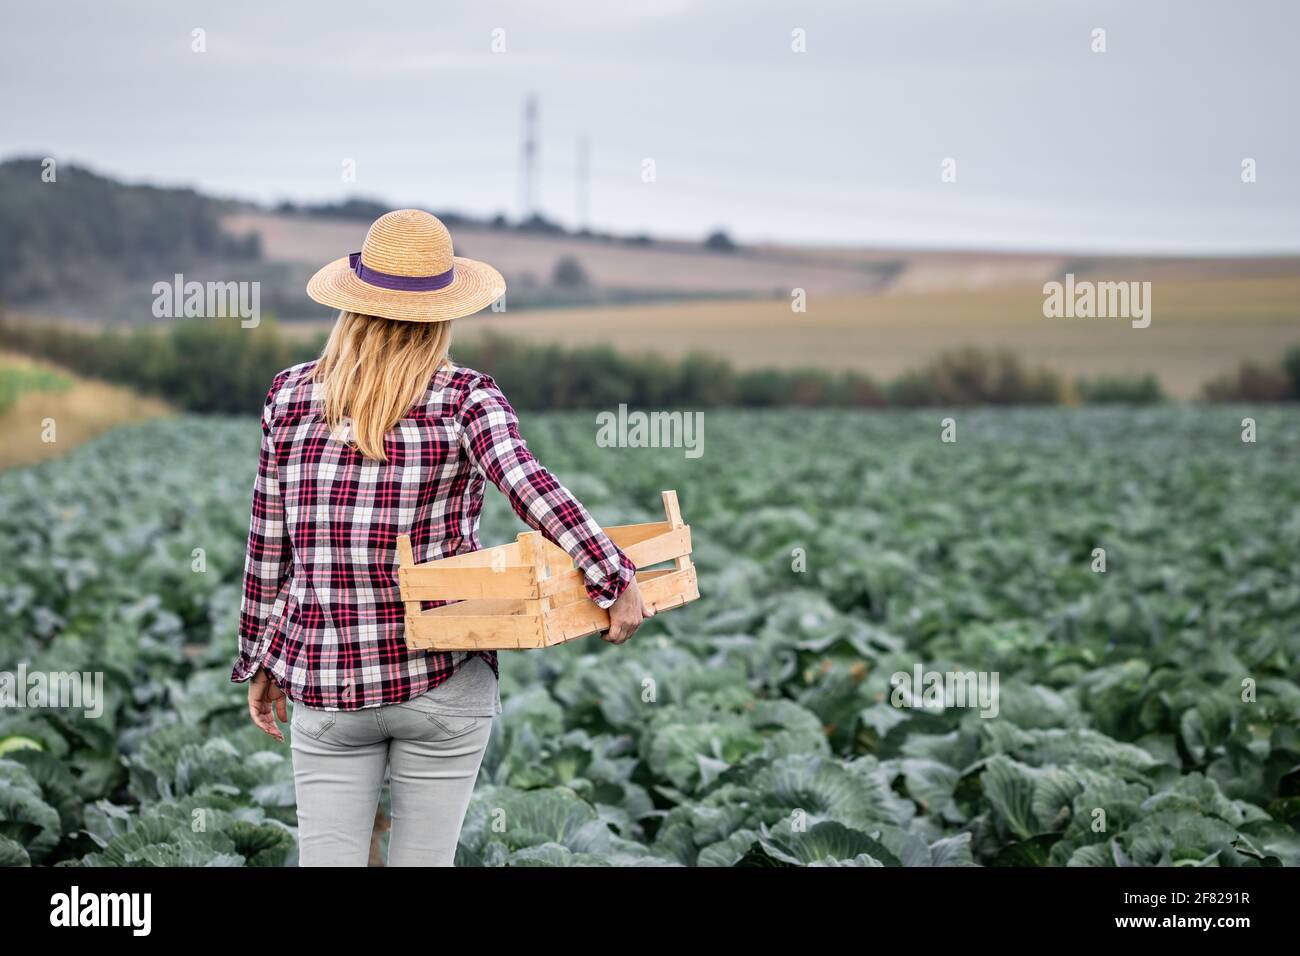 Woman harvesting at cabbage field. Farmer with straw hat and plaid shirt looking at her organic farm. Agricultural occupation Stock Photo